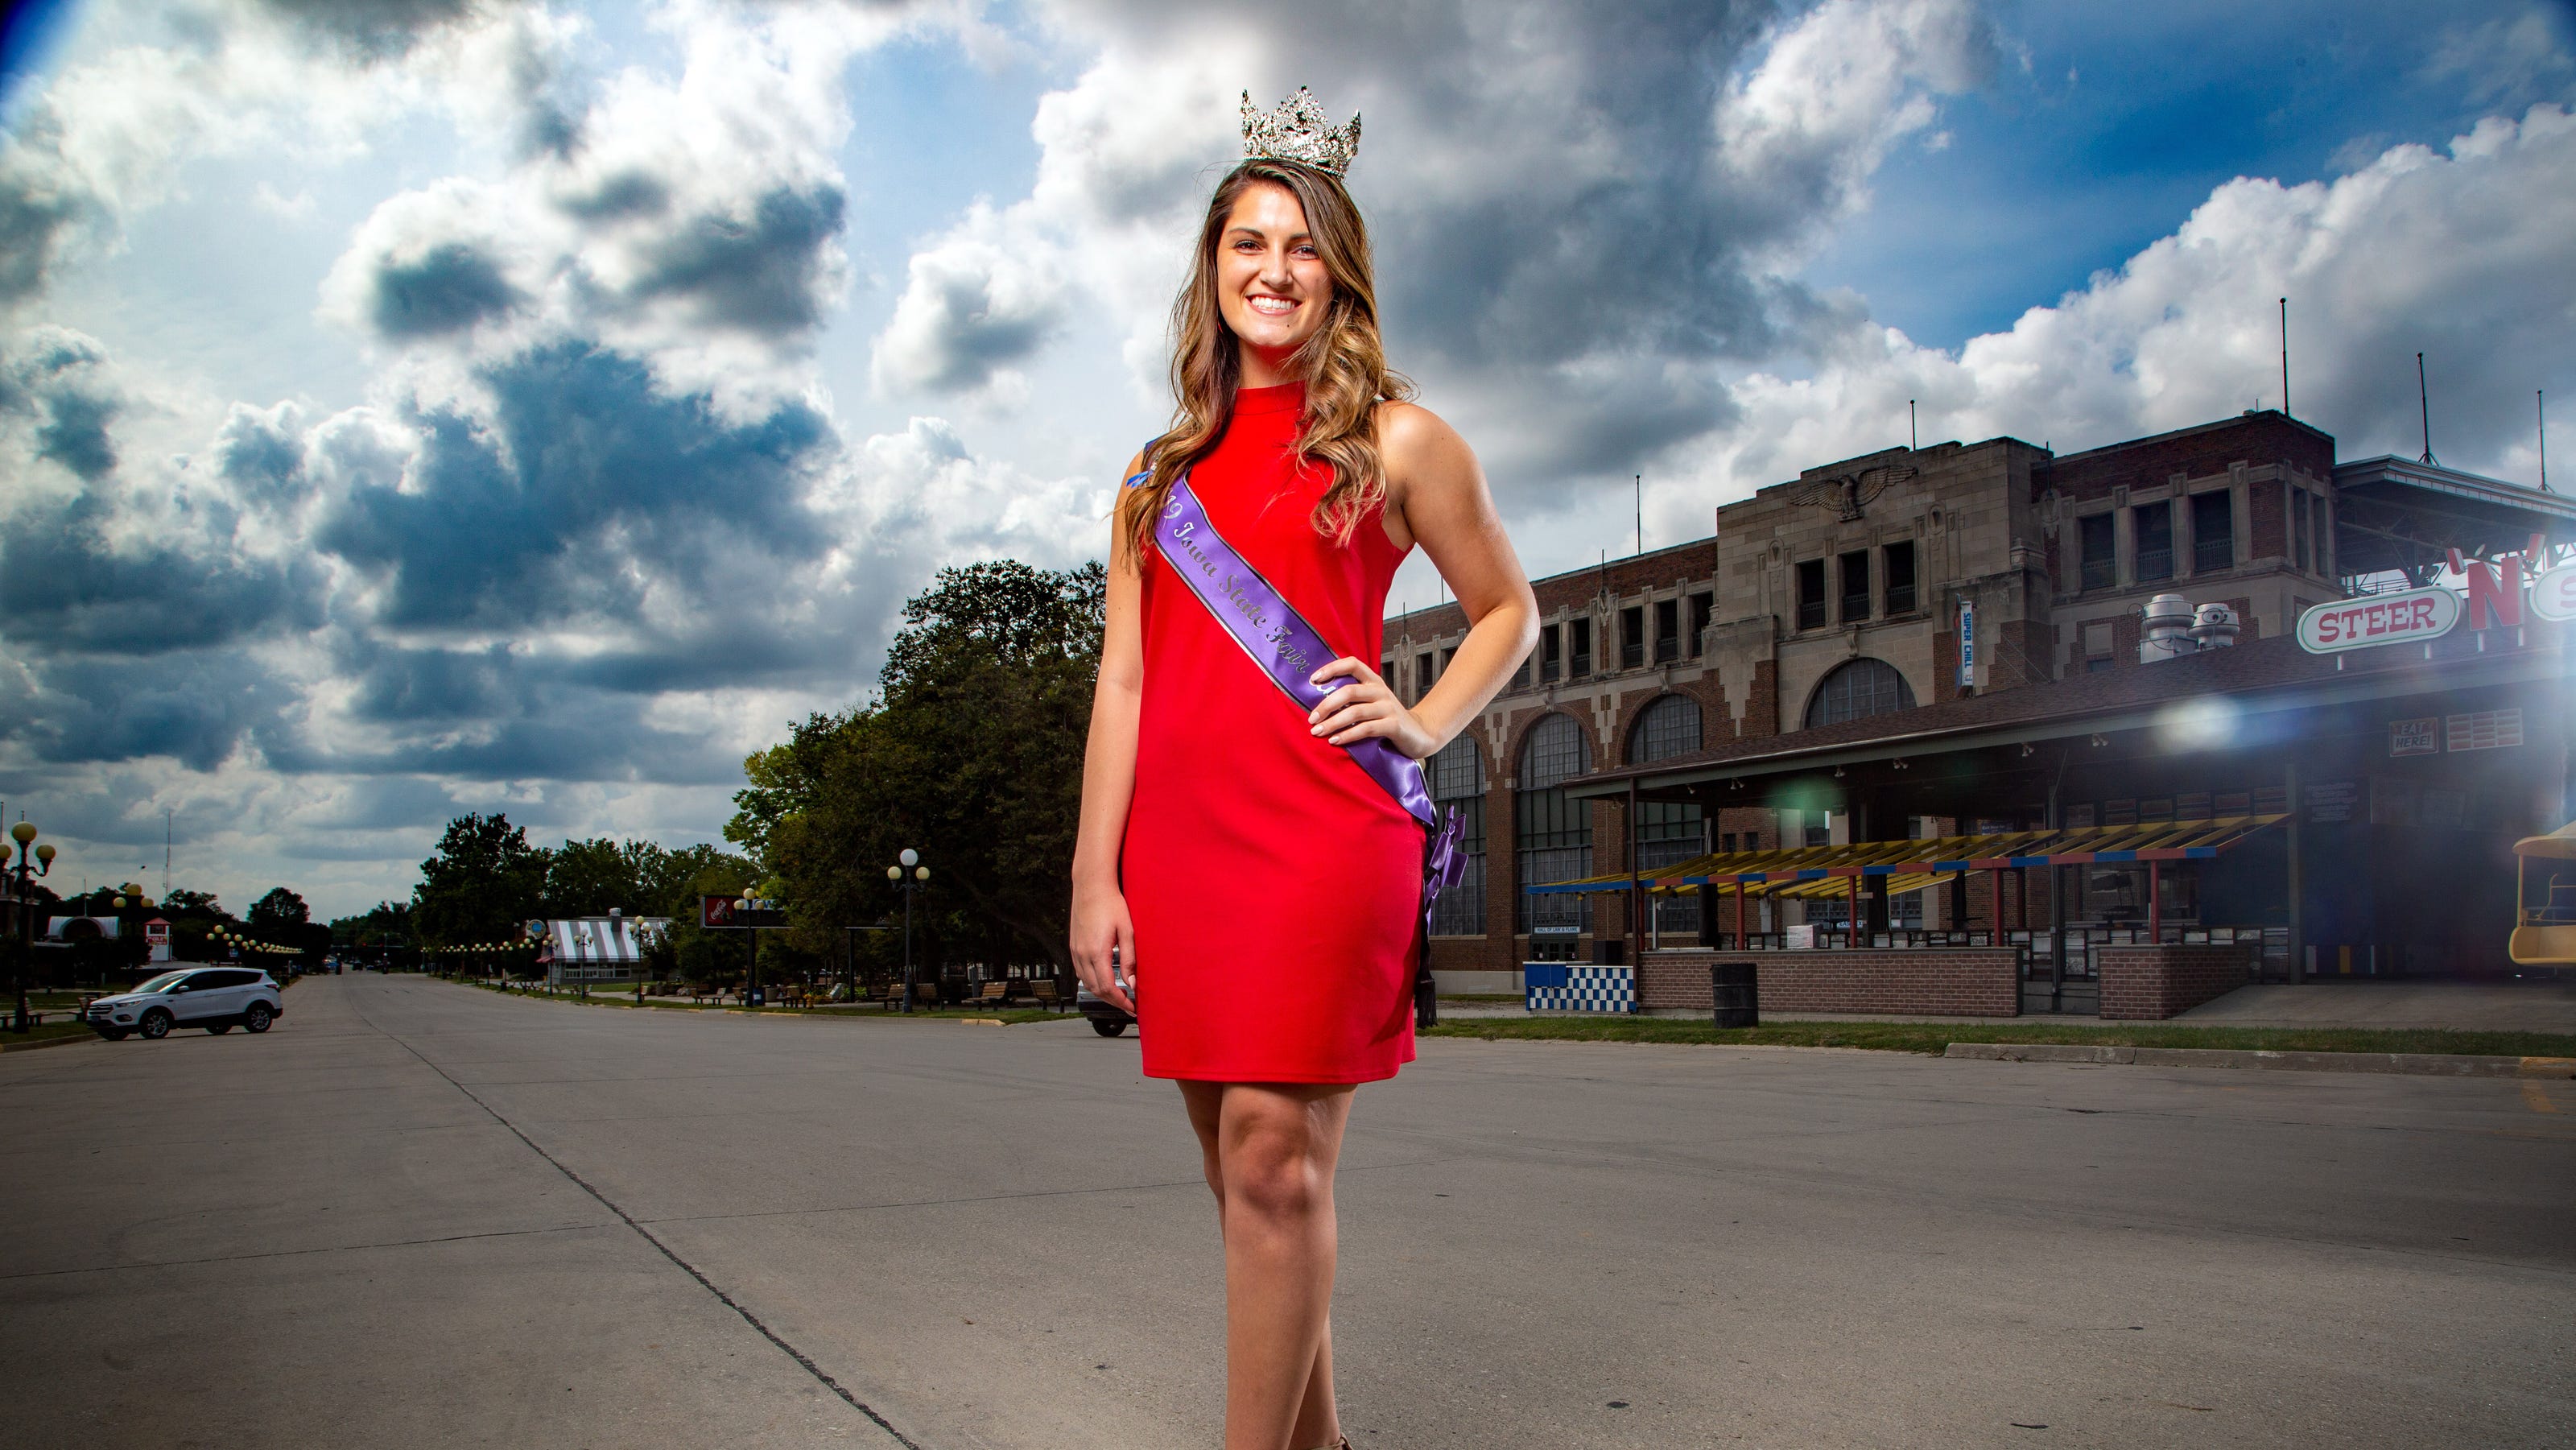 Iowa State Fair Queen will serve for two years due to COVID